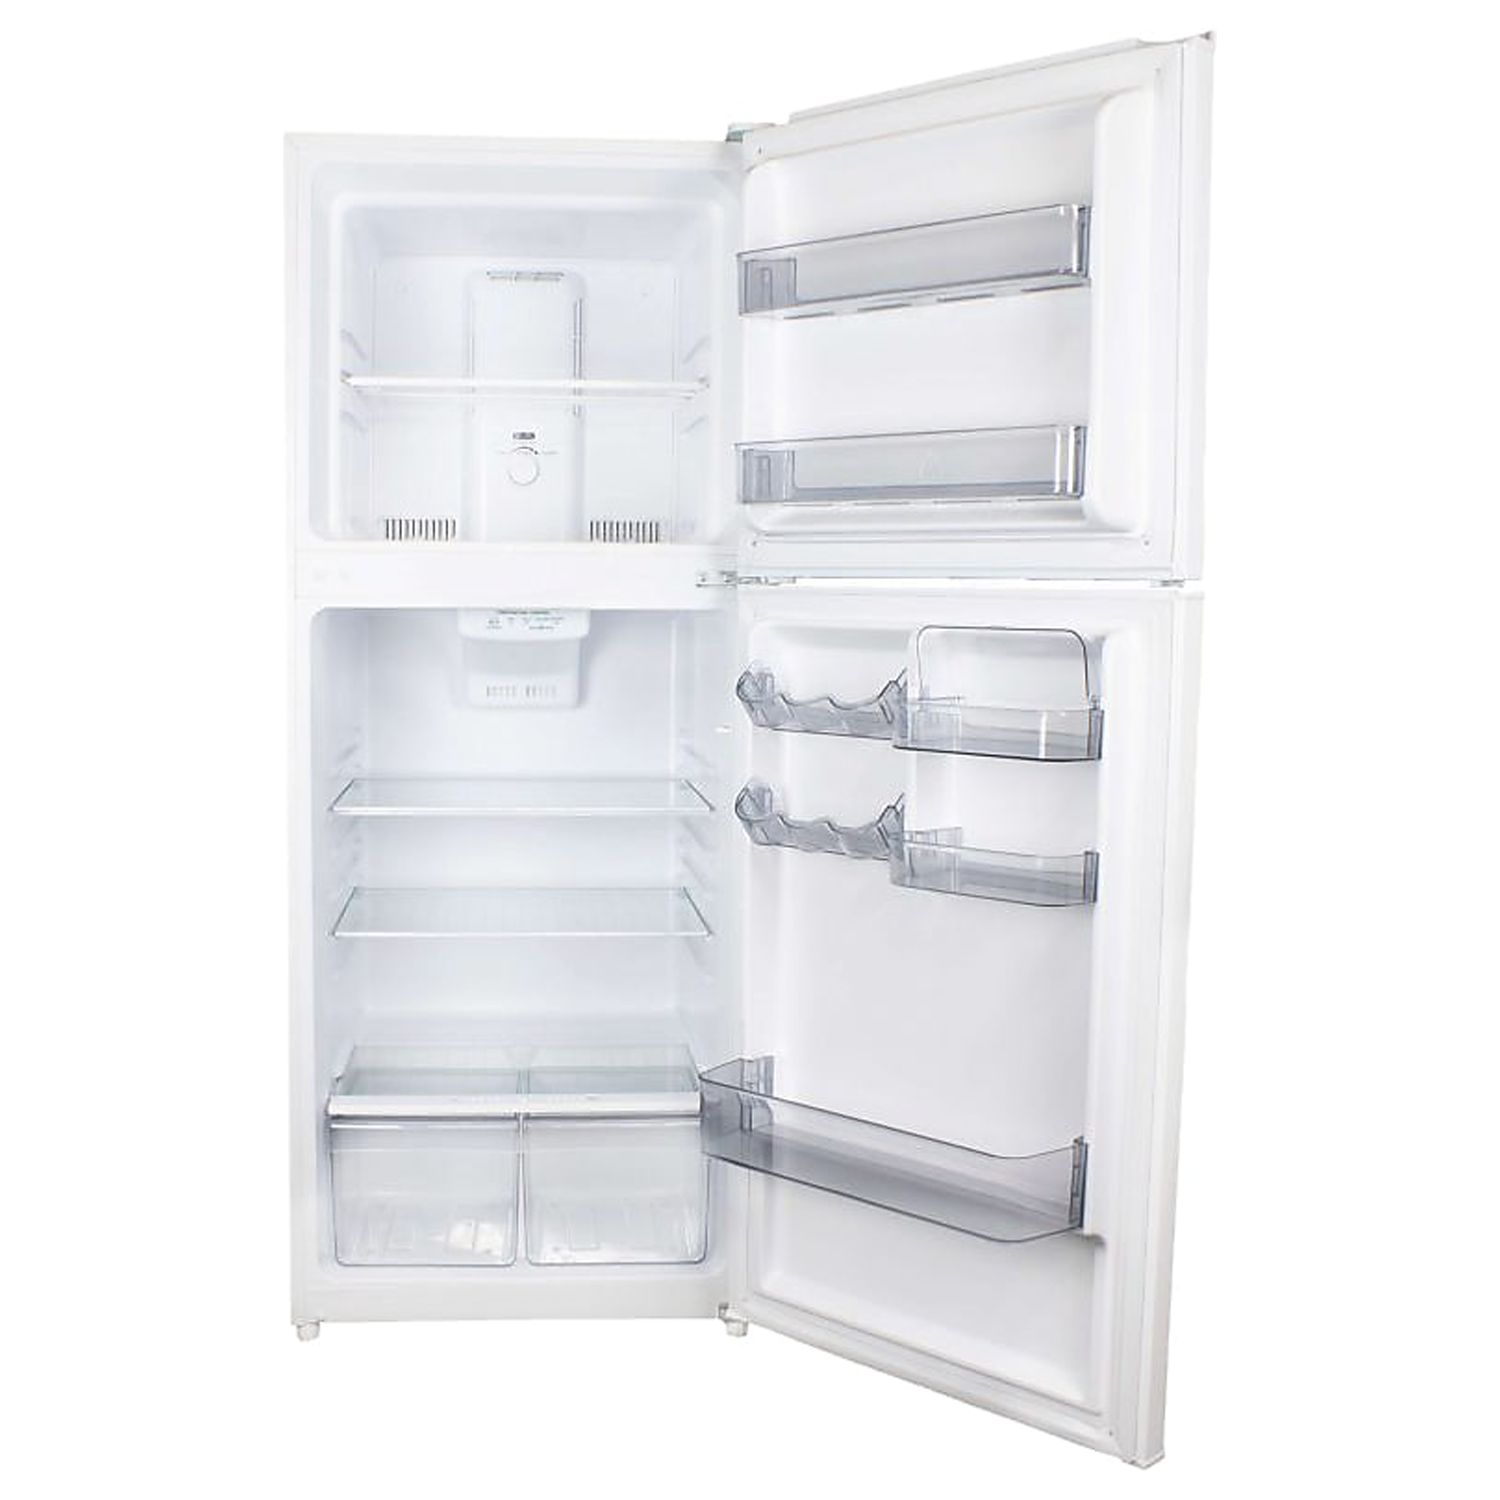 Danby 10.1 cu. ft. Apartment Size Refrigerator, White - image 3 of 9